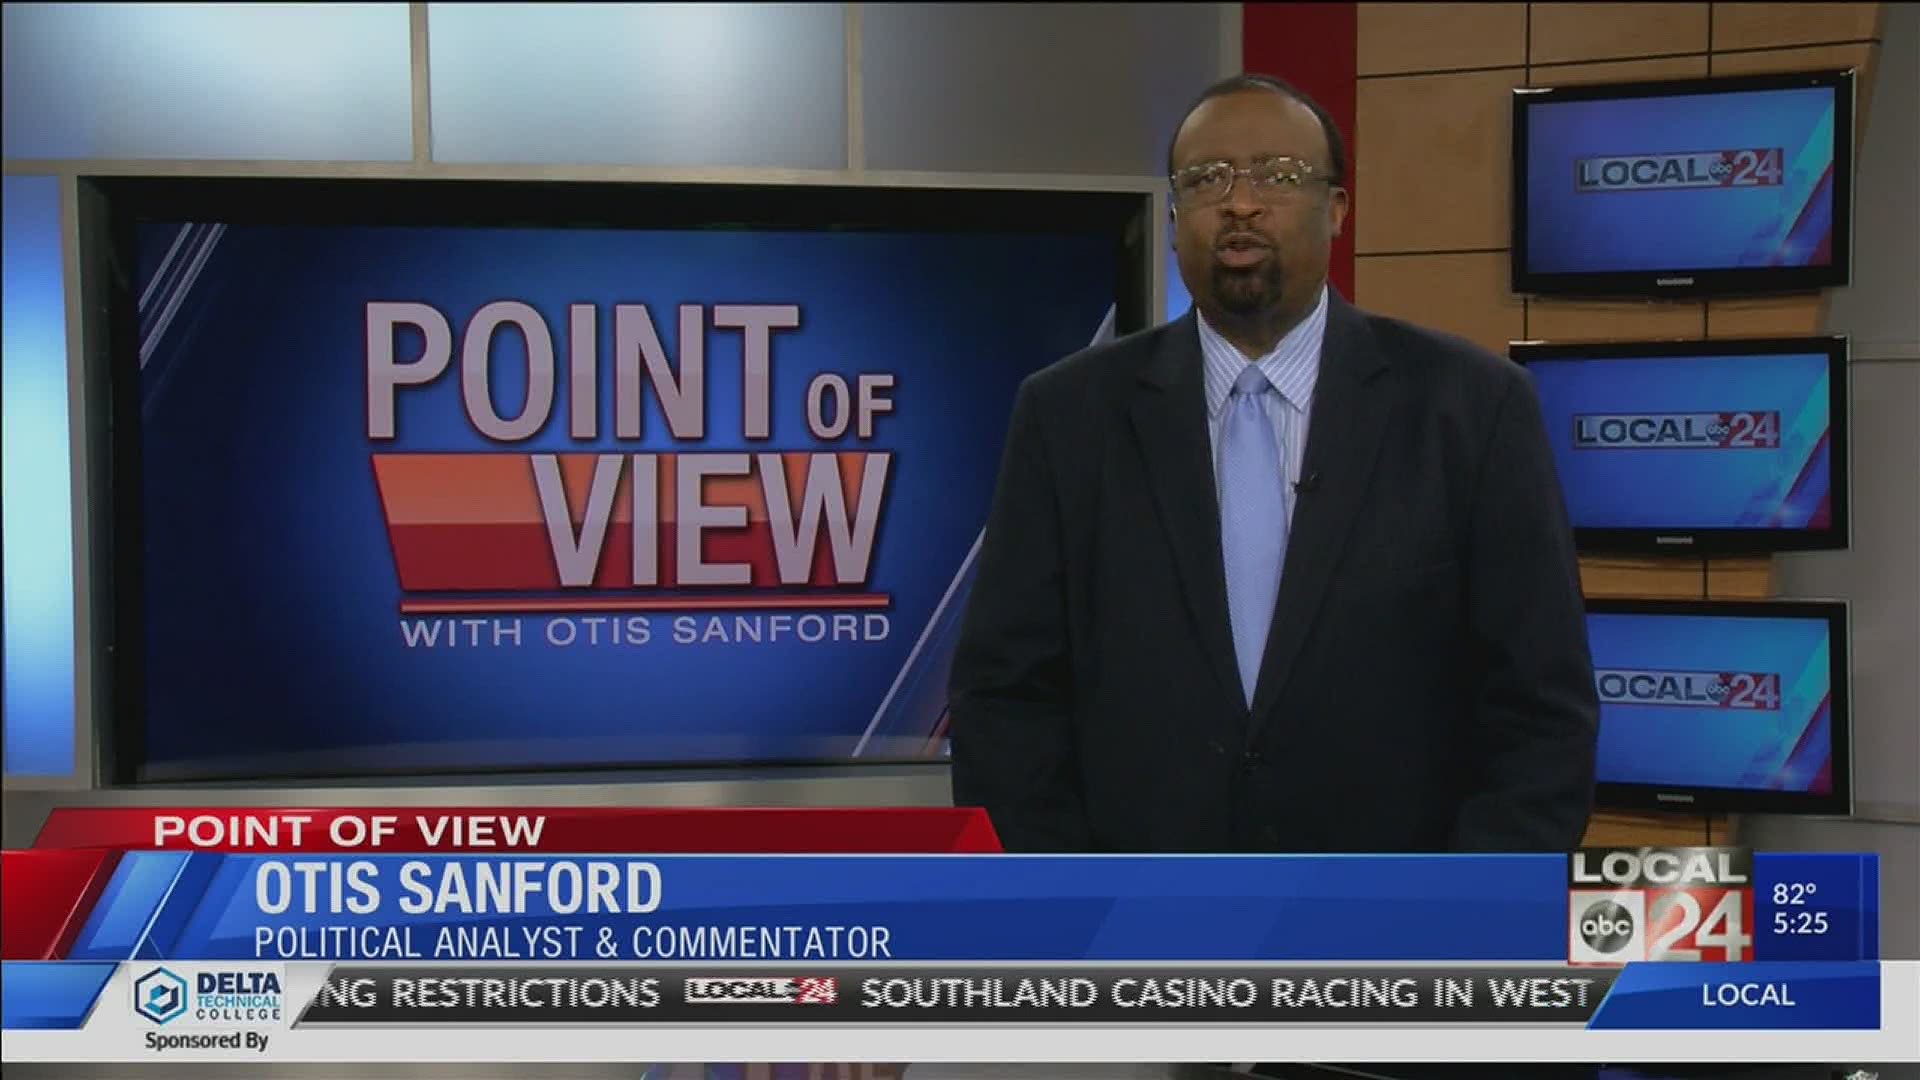 Local 24 News political analyst and commentator Otis Sanford shares his point of view on the end of the battle over Memphis’ Confederate parks and statues.